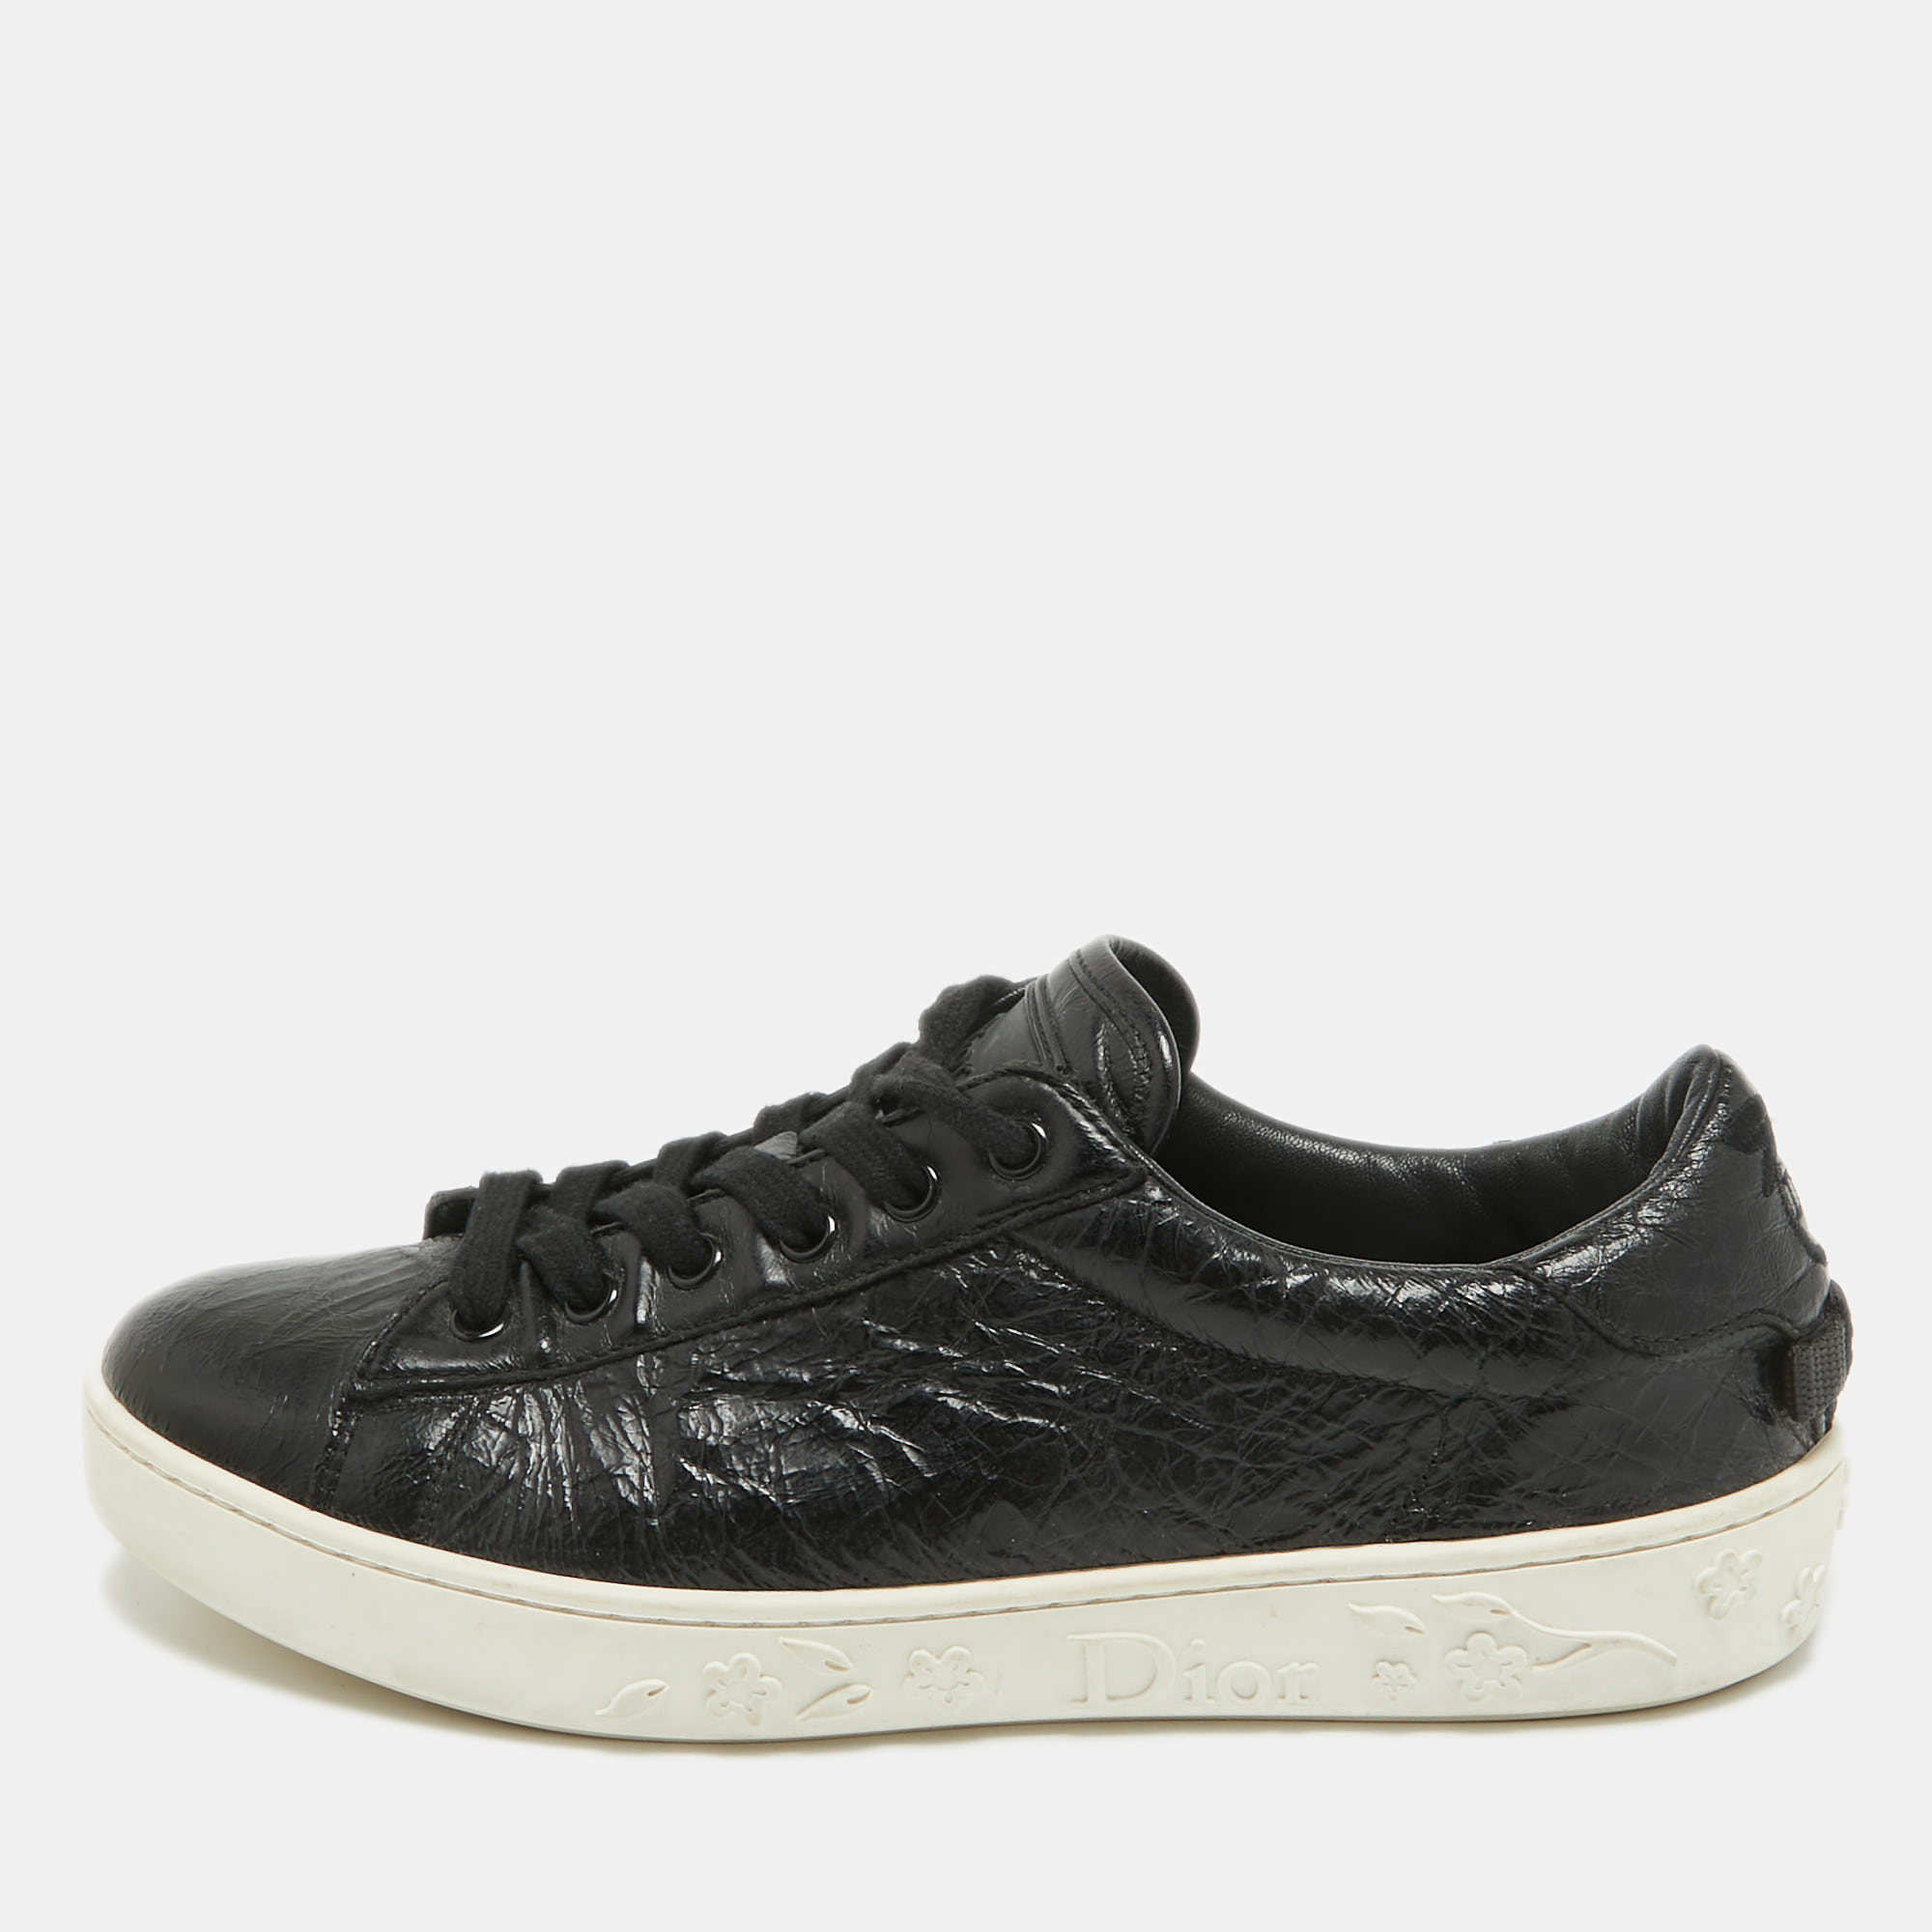 Dior black leather low top sneakers size 37.5